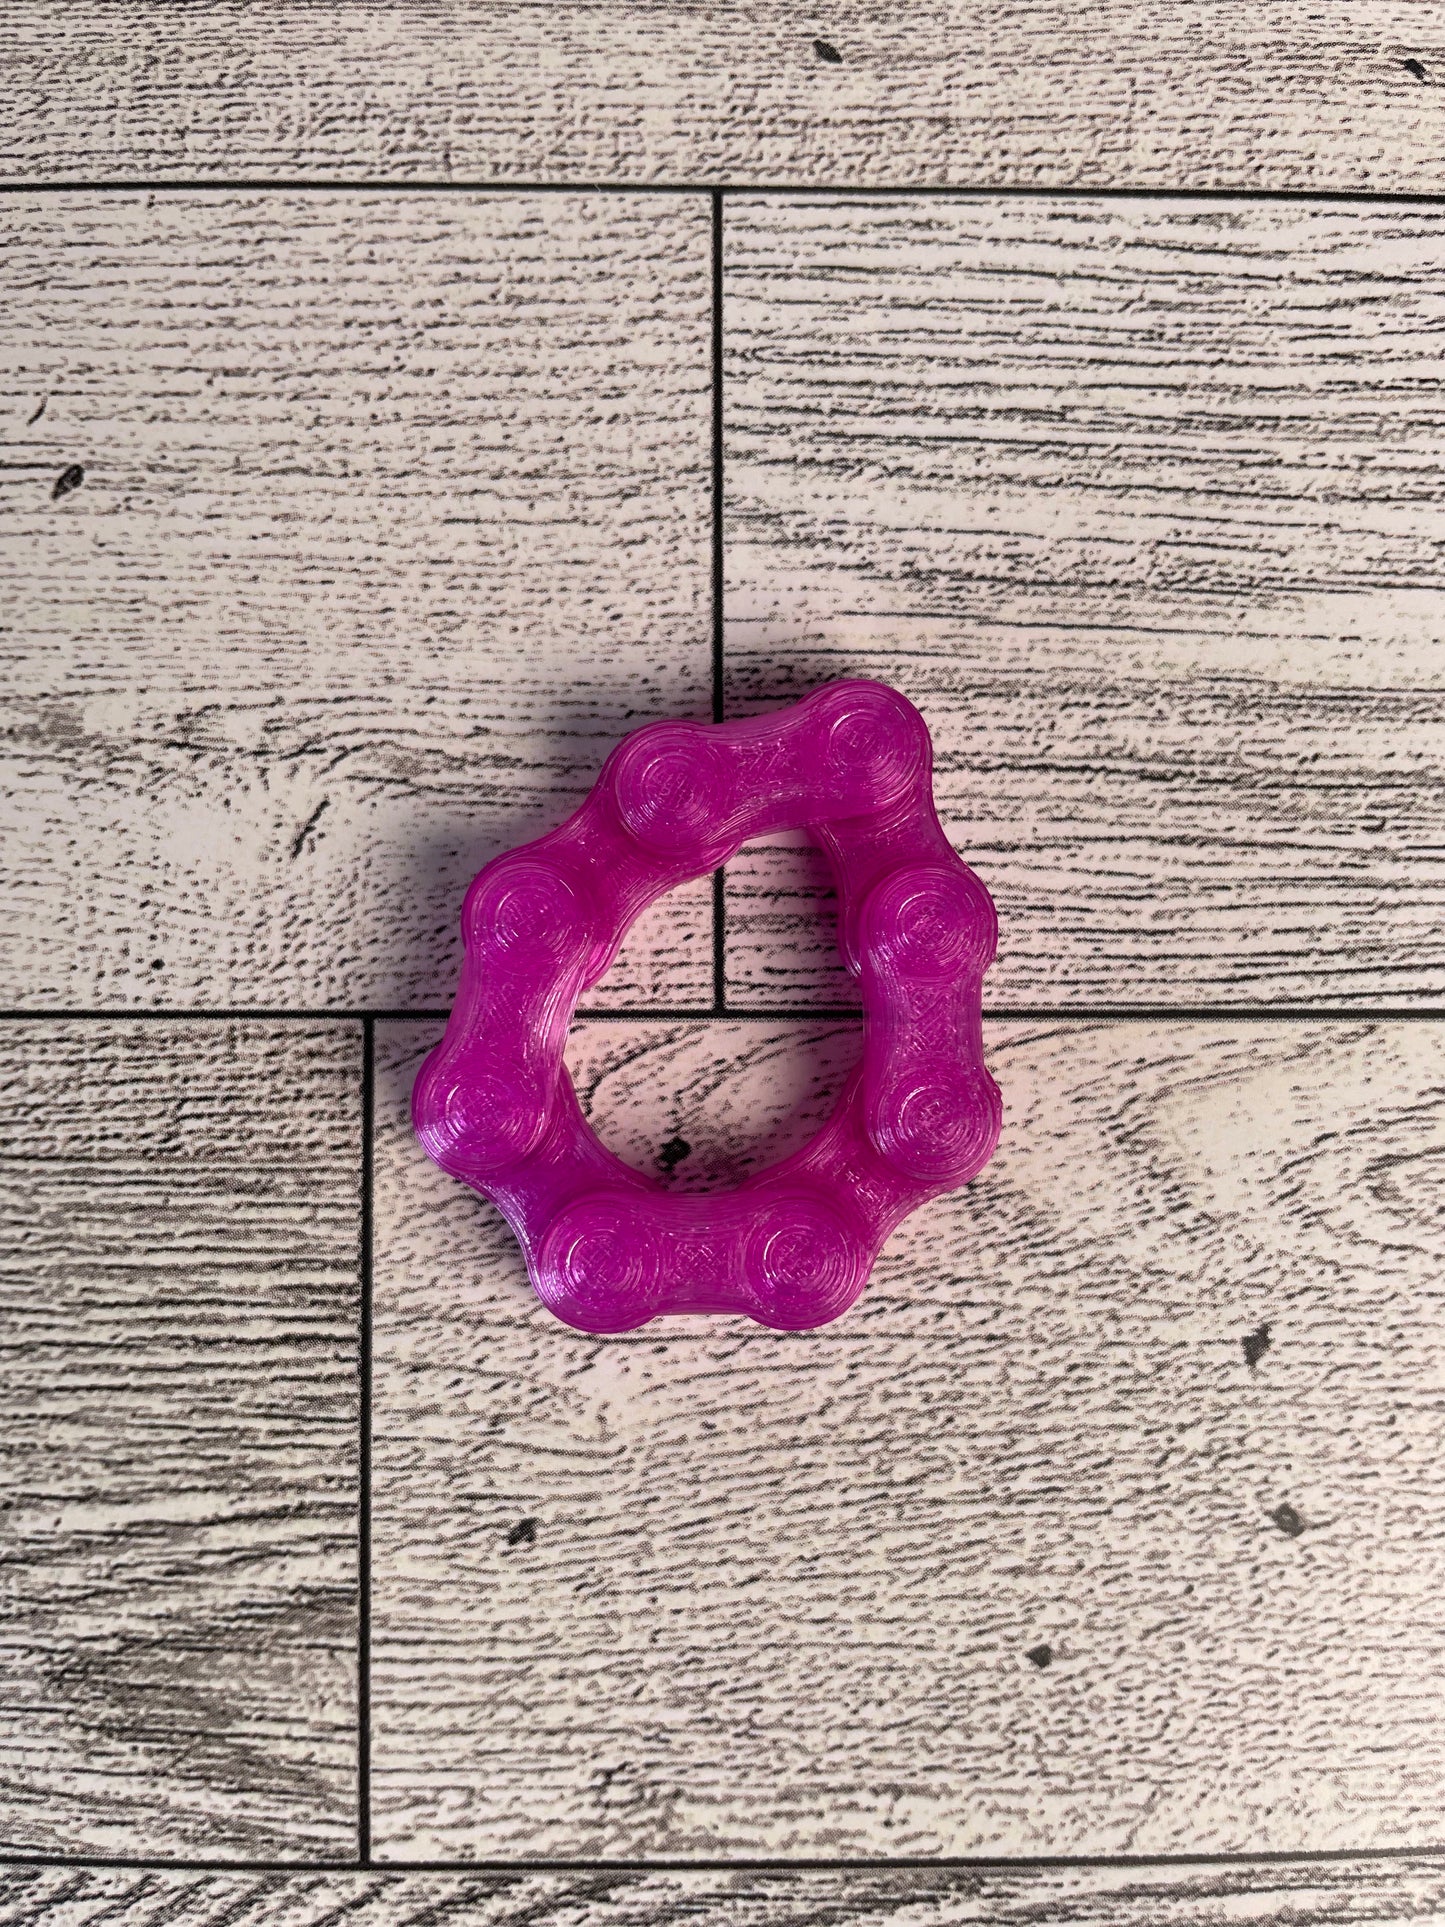 A translucent purple chain link on a wood backdrop. The chain is arranged in a circle shape and there are four links